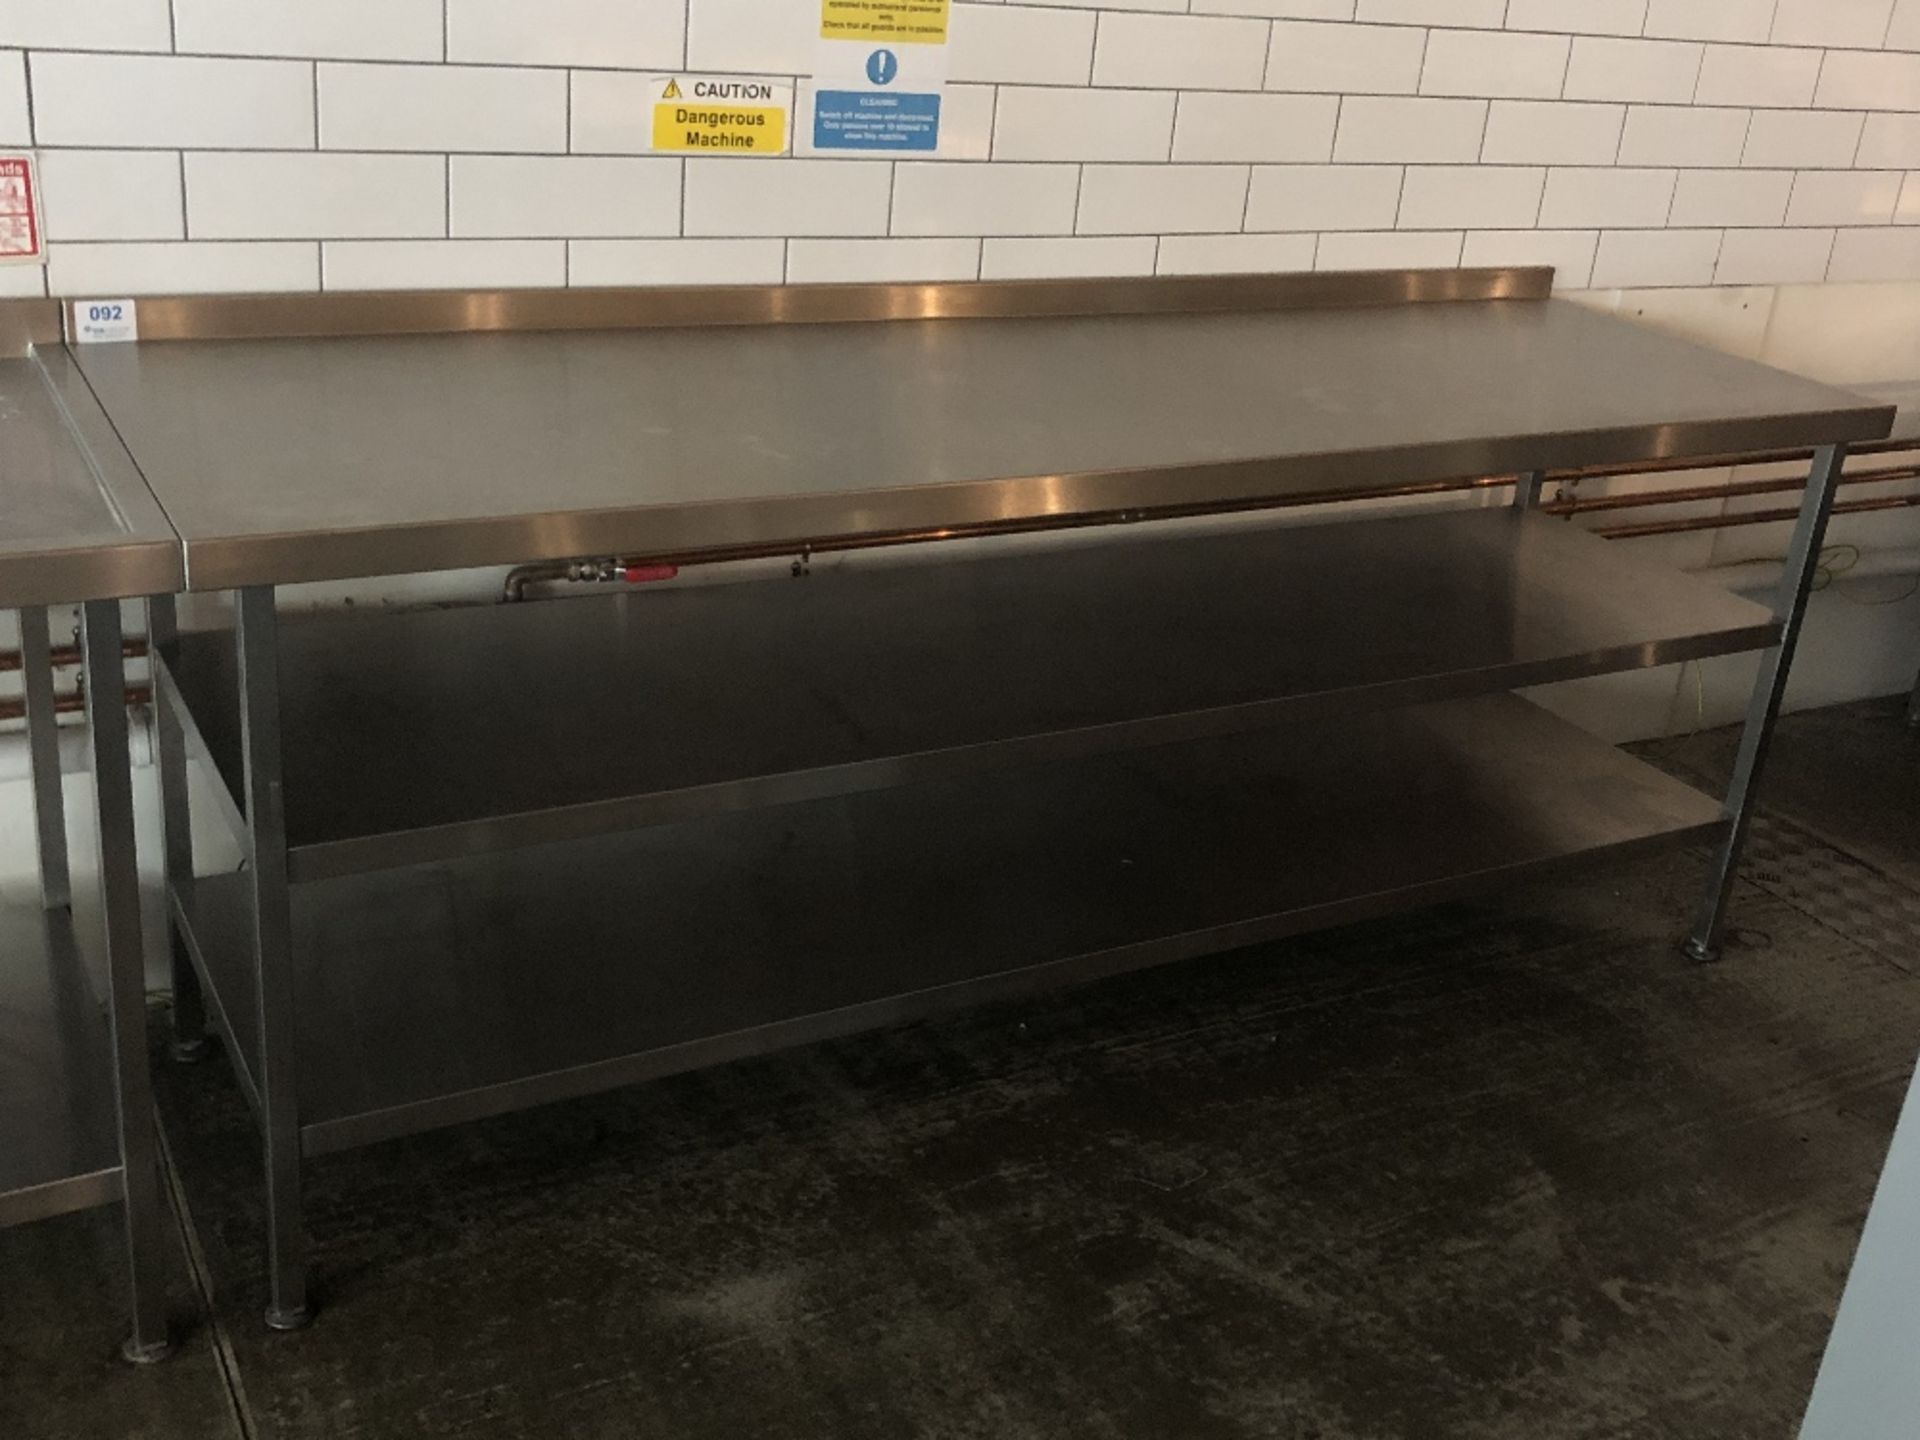 Rectangular Three Tier Stainless Steel Preparation Table - Image 3 of 3